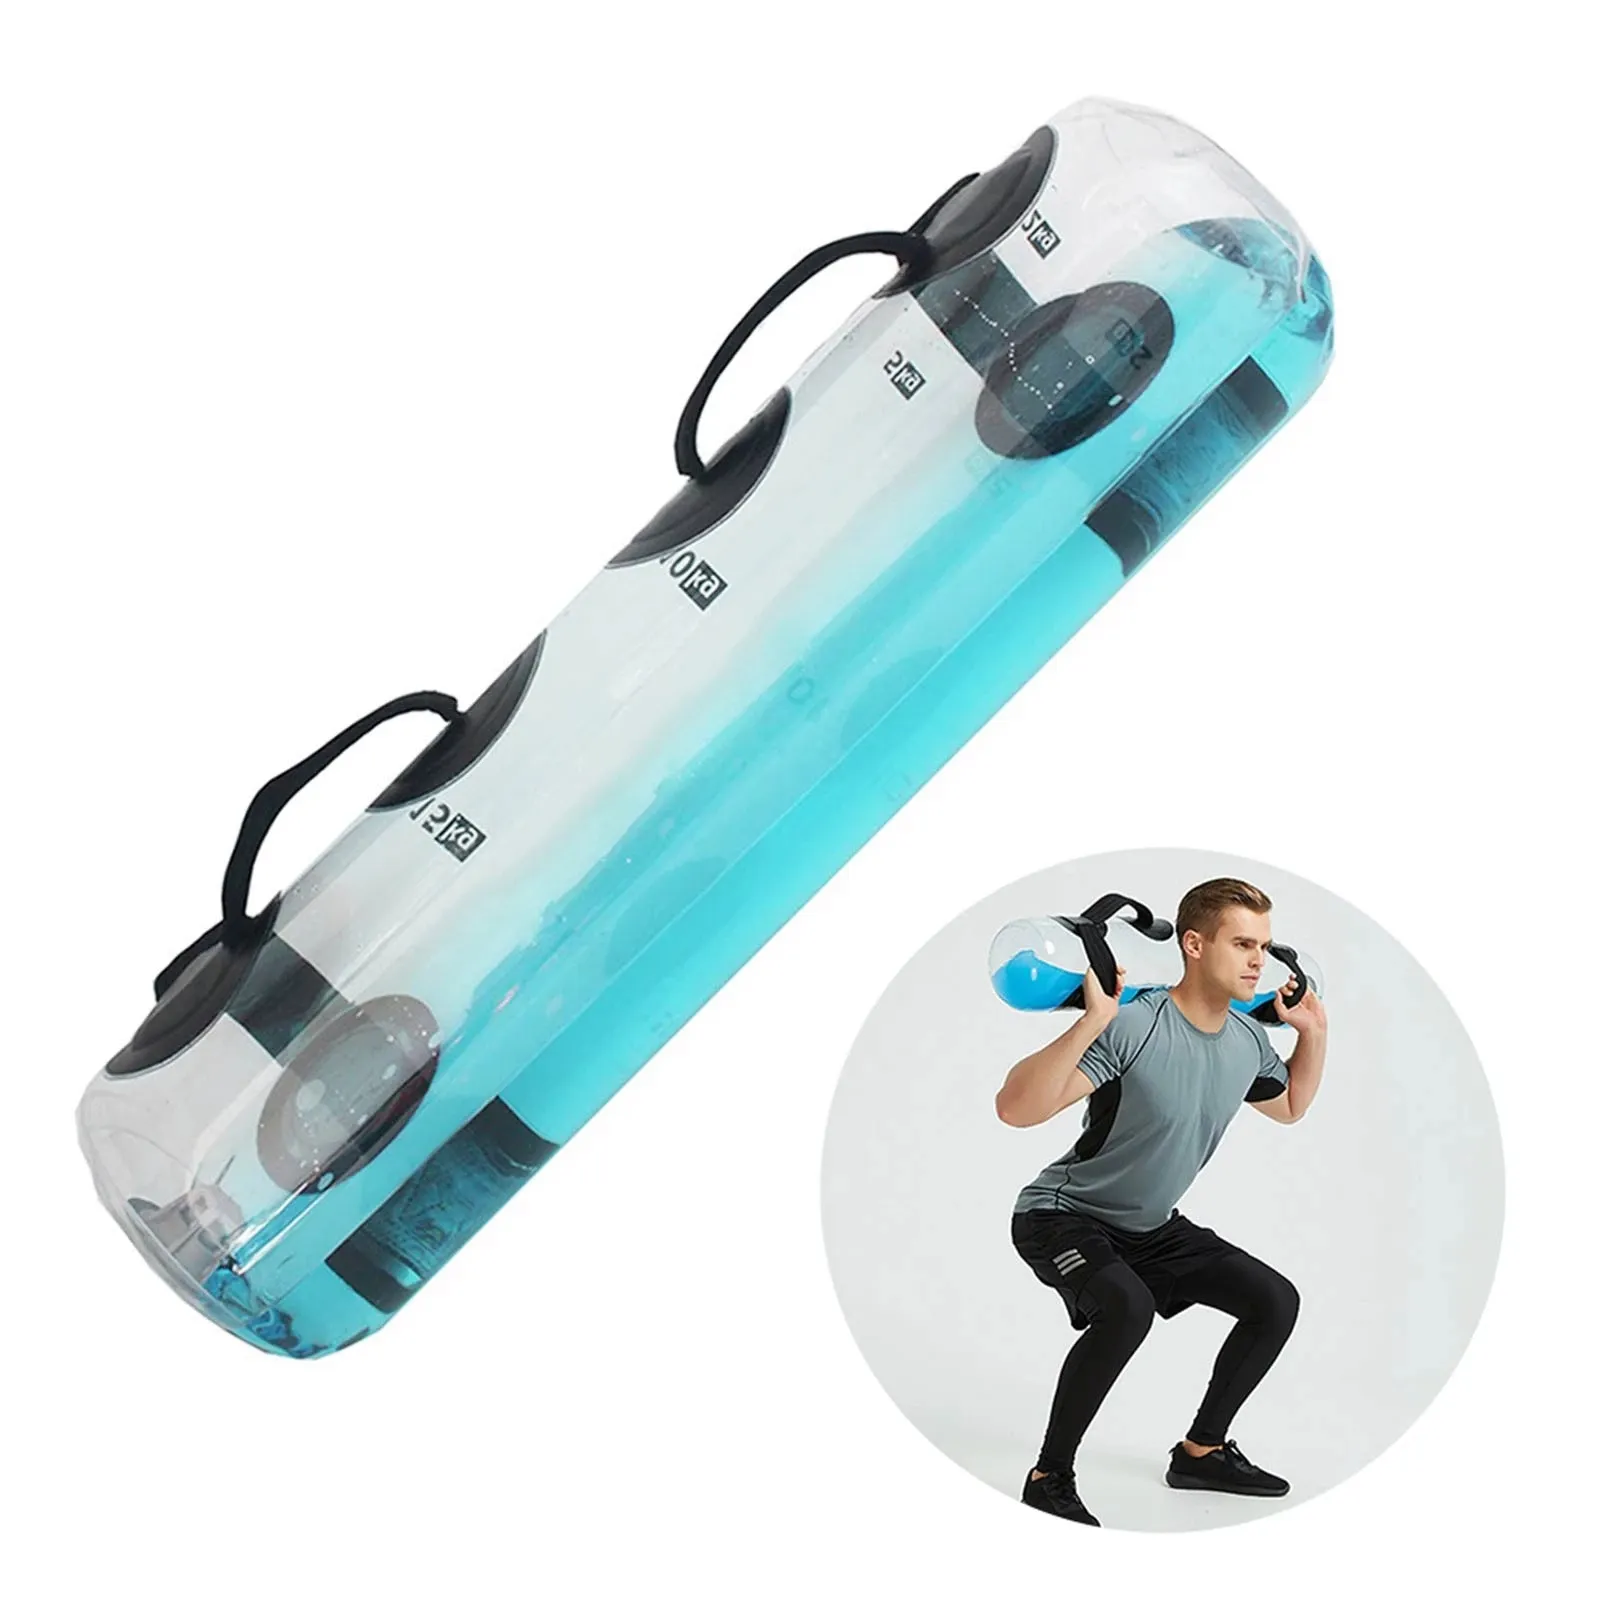 15/20/35KG Water Power Bag Home Fitness Aqua Bags Weightlifting Body Building Gym Sports Indoor Outdoor Tool